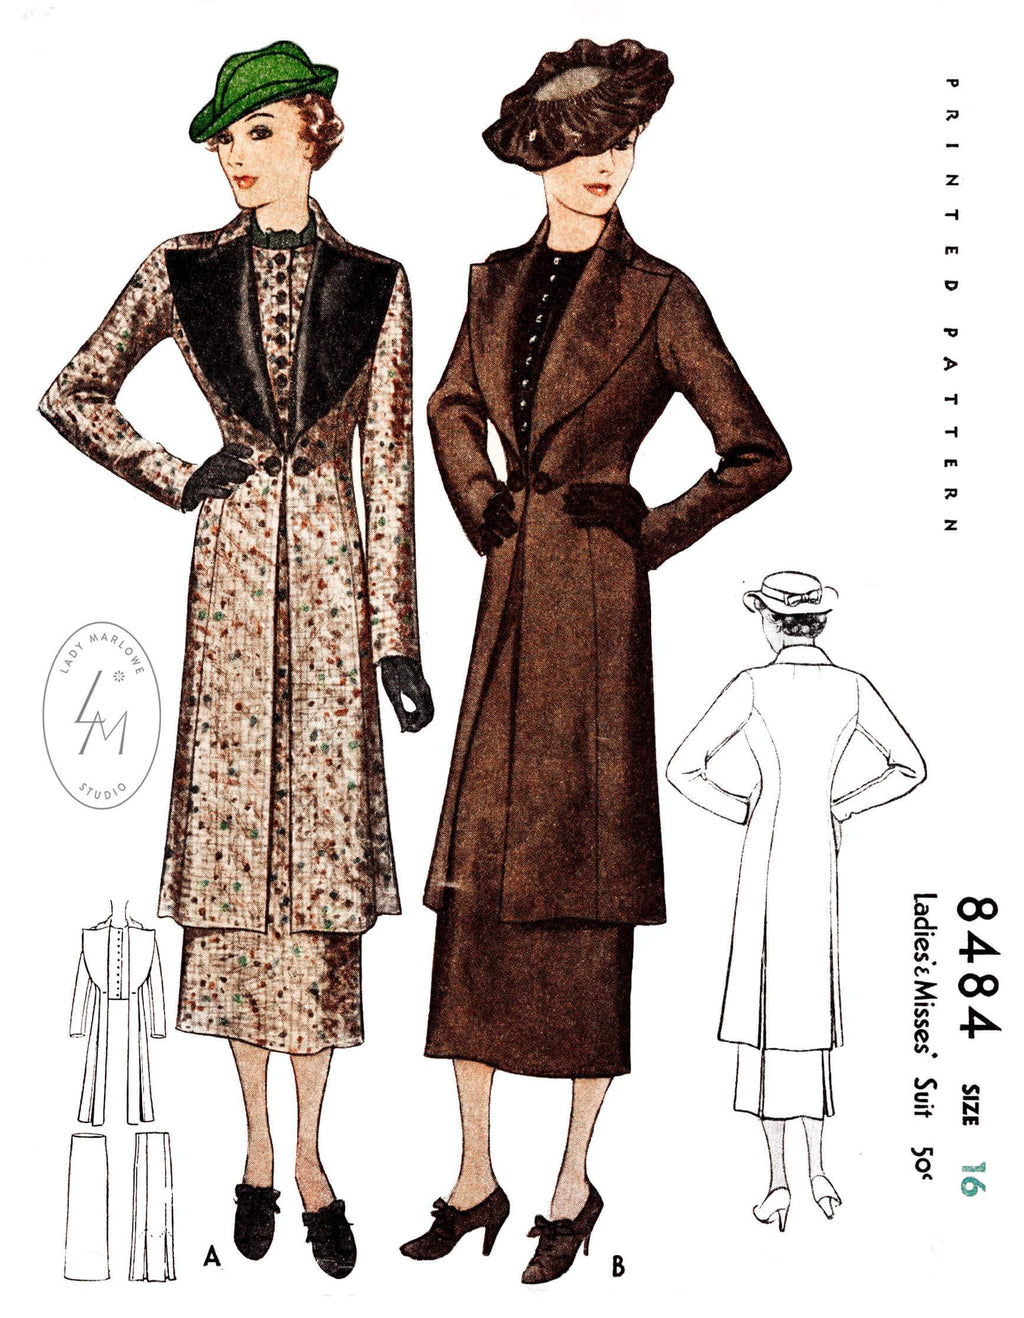 1930s 1935 outerwear & skirt ensemble McCall 8484 wide lapel coat inverted pleat skirt vintage sewing pattern reproduction